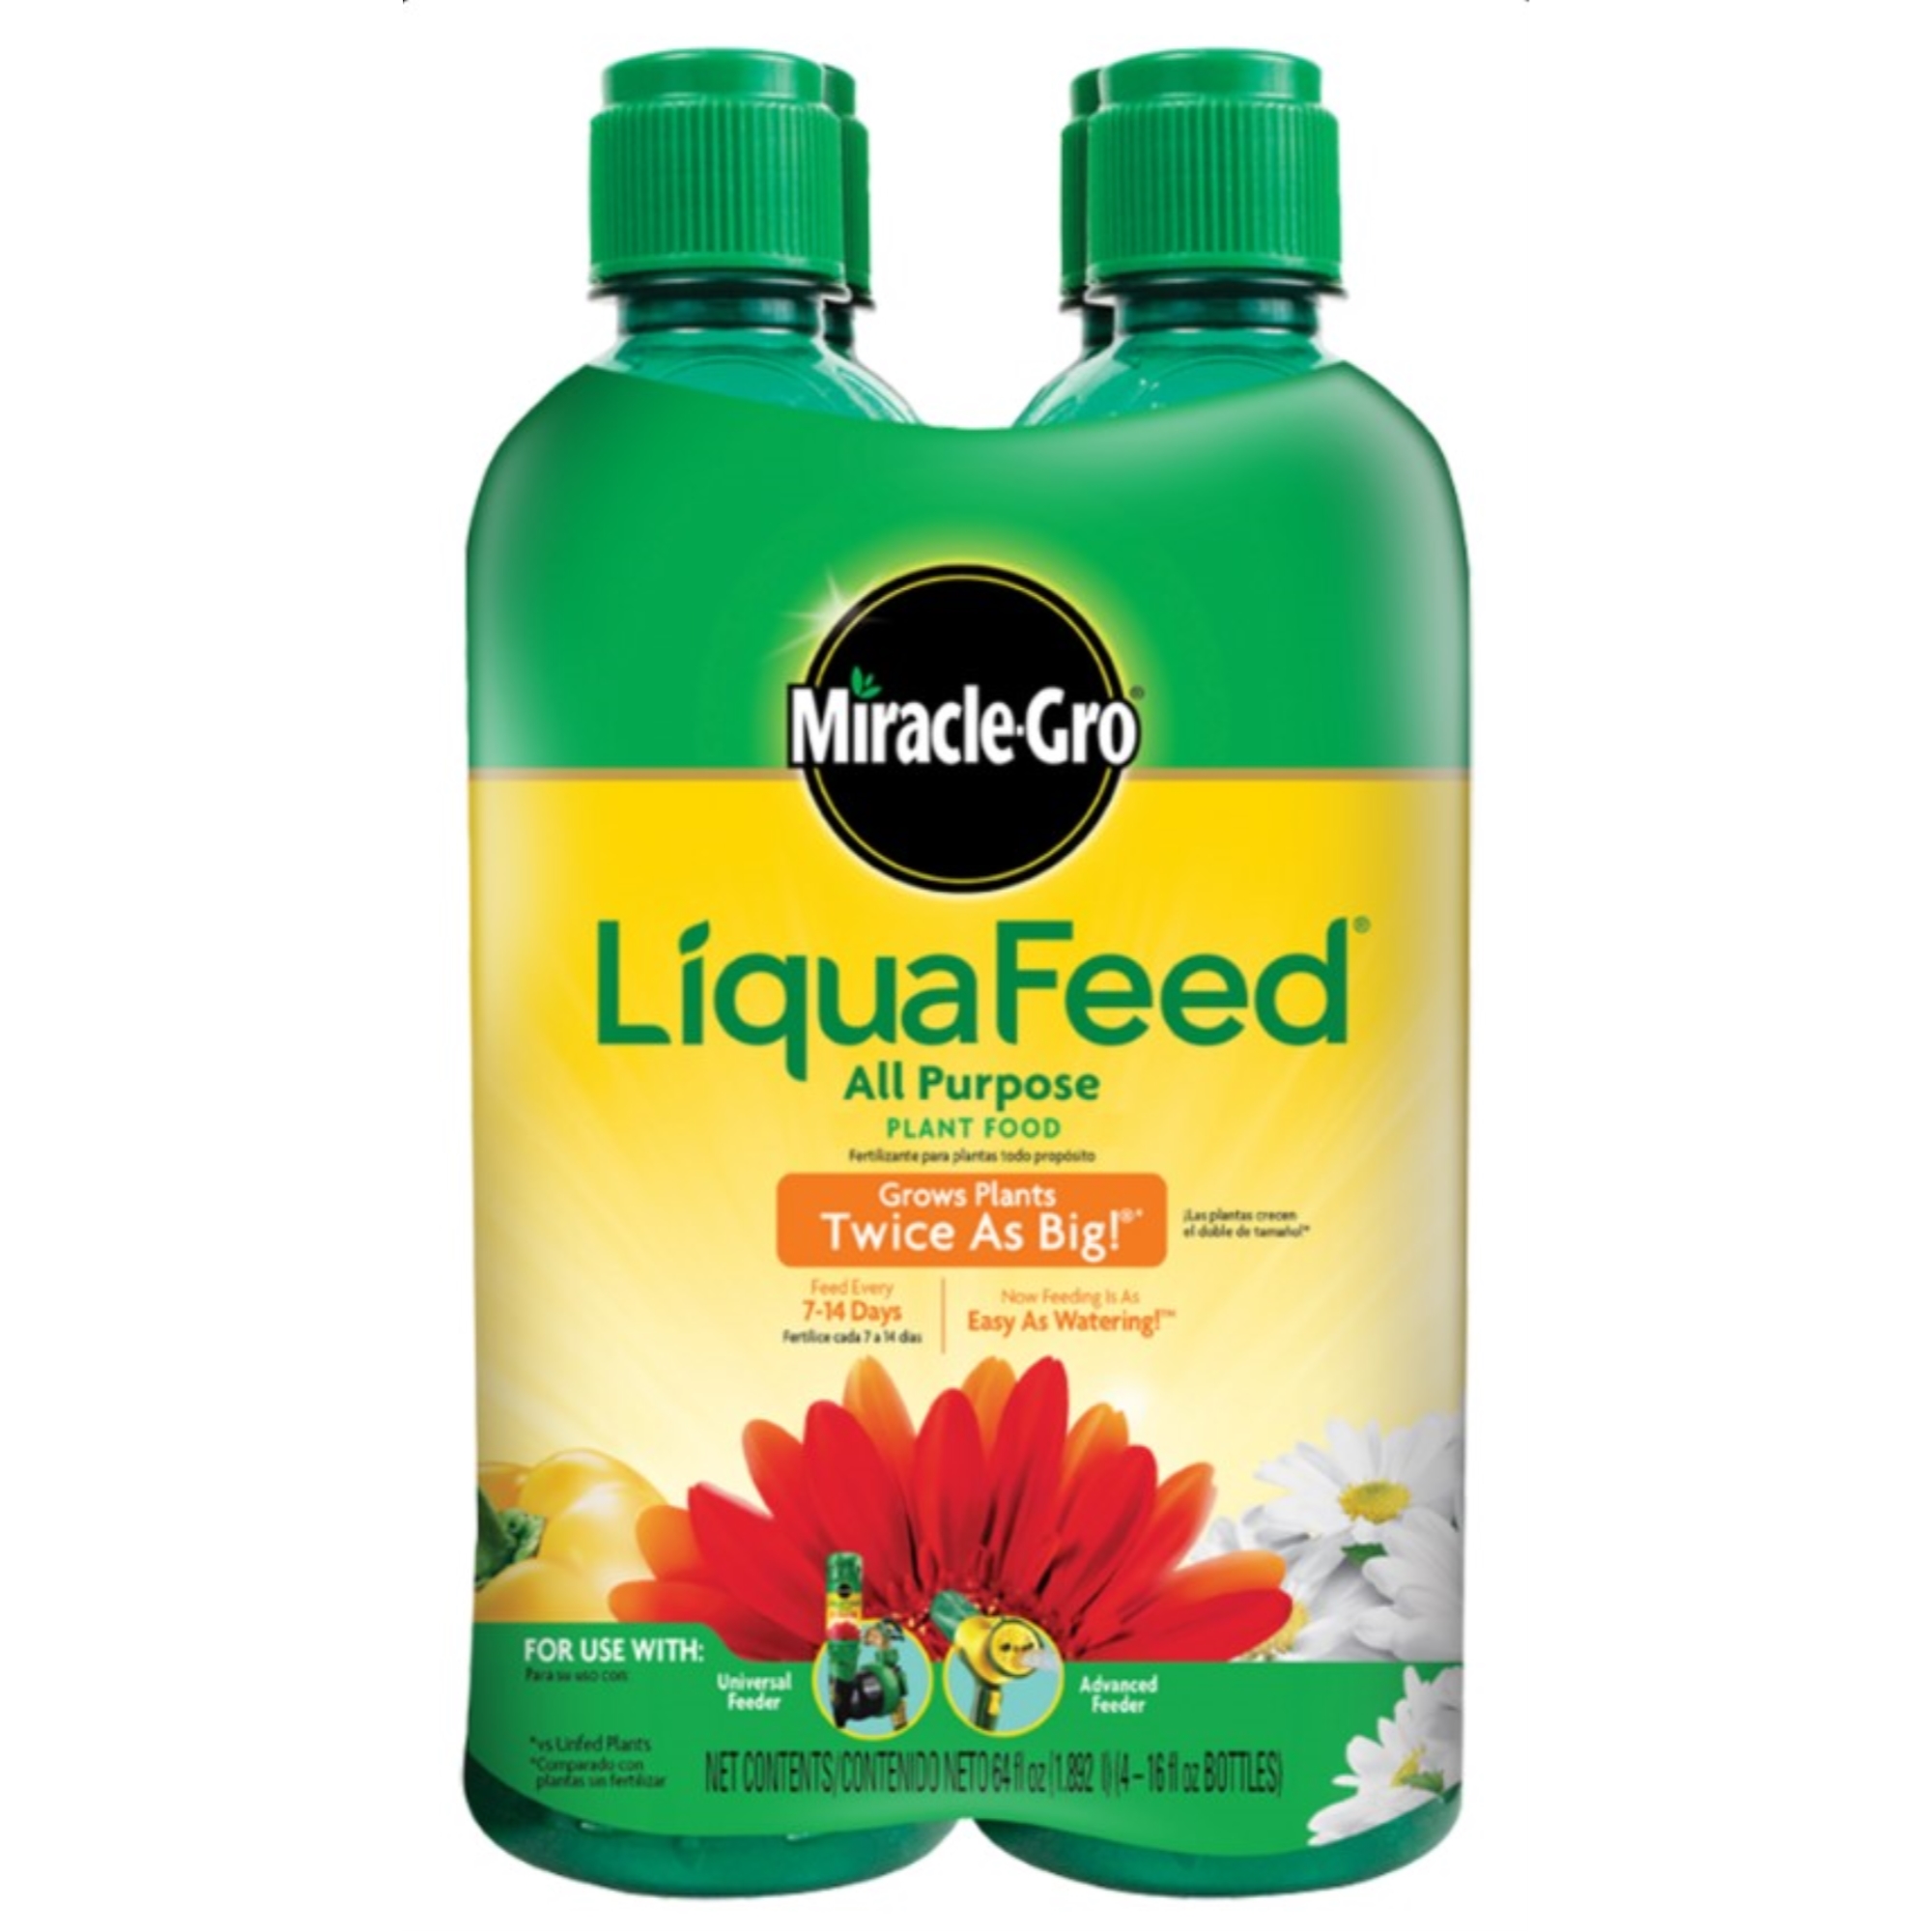 Miracle-Gro Liquafeed All Purpose Plant Food, 4-Pack Refills, 16 fl. oz. - image 1 of 9